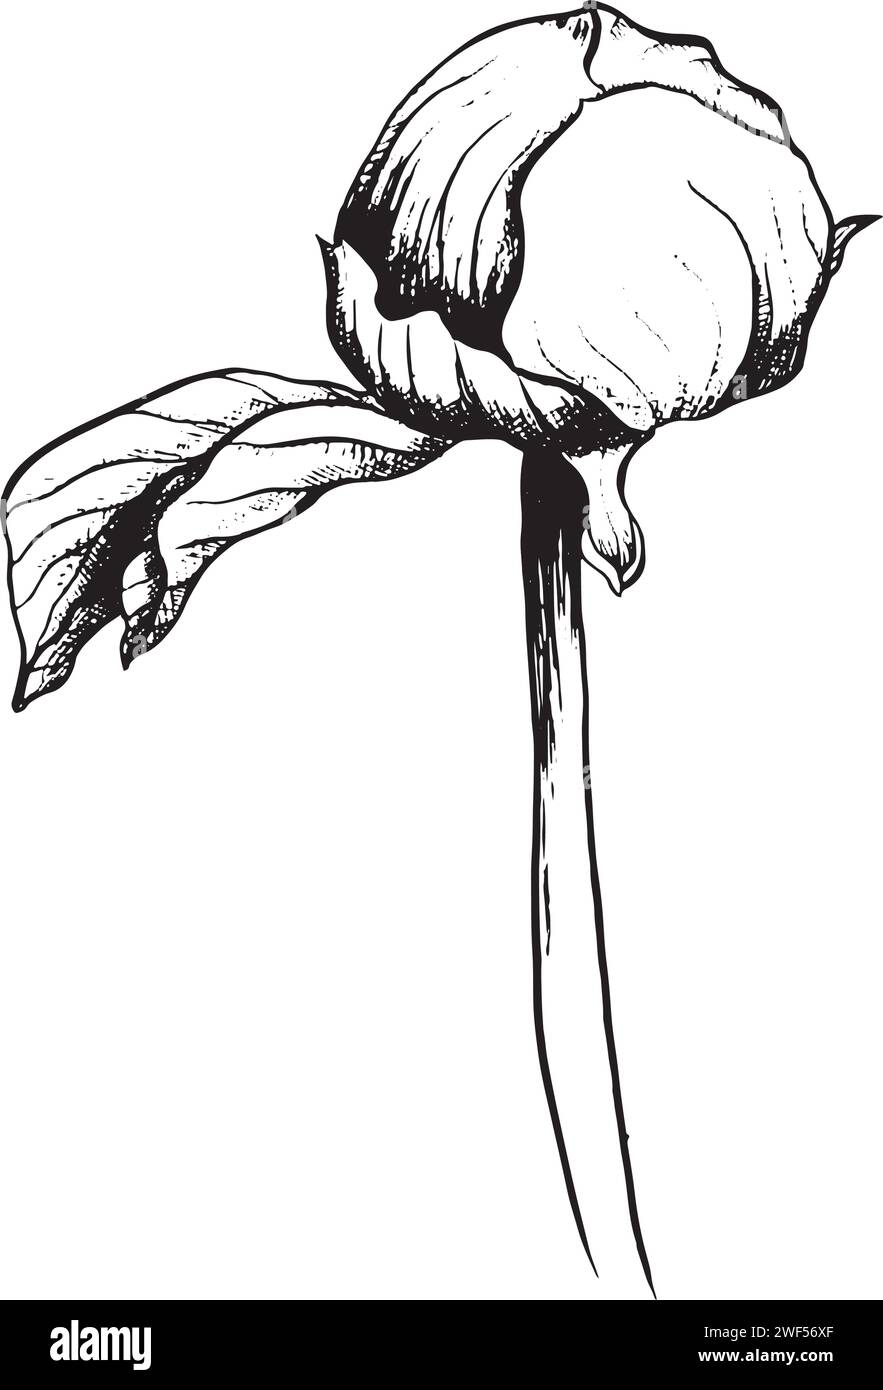 Peony bud flower, side view. Graphic botanical illustration hand drawn in black ink. Romantic floral Element for wedding stationary, greetings cards Stock Vector